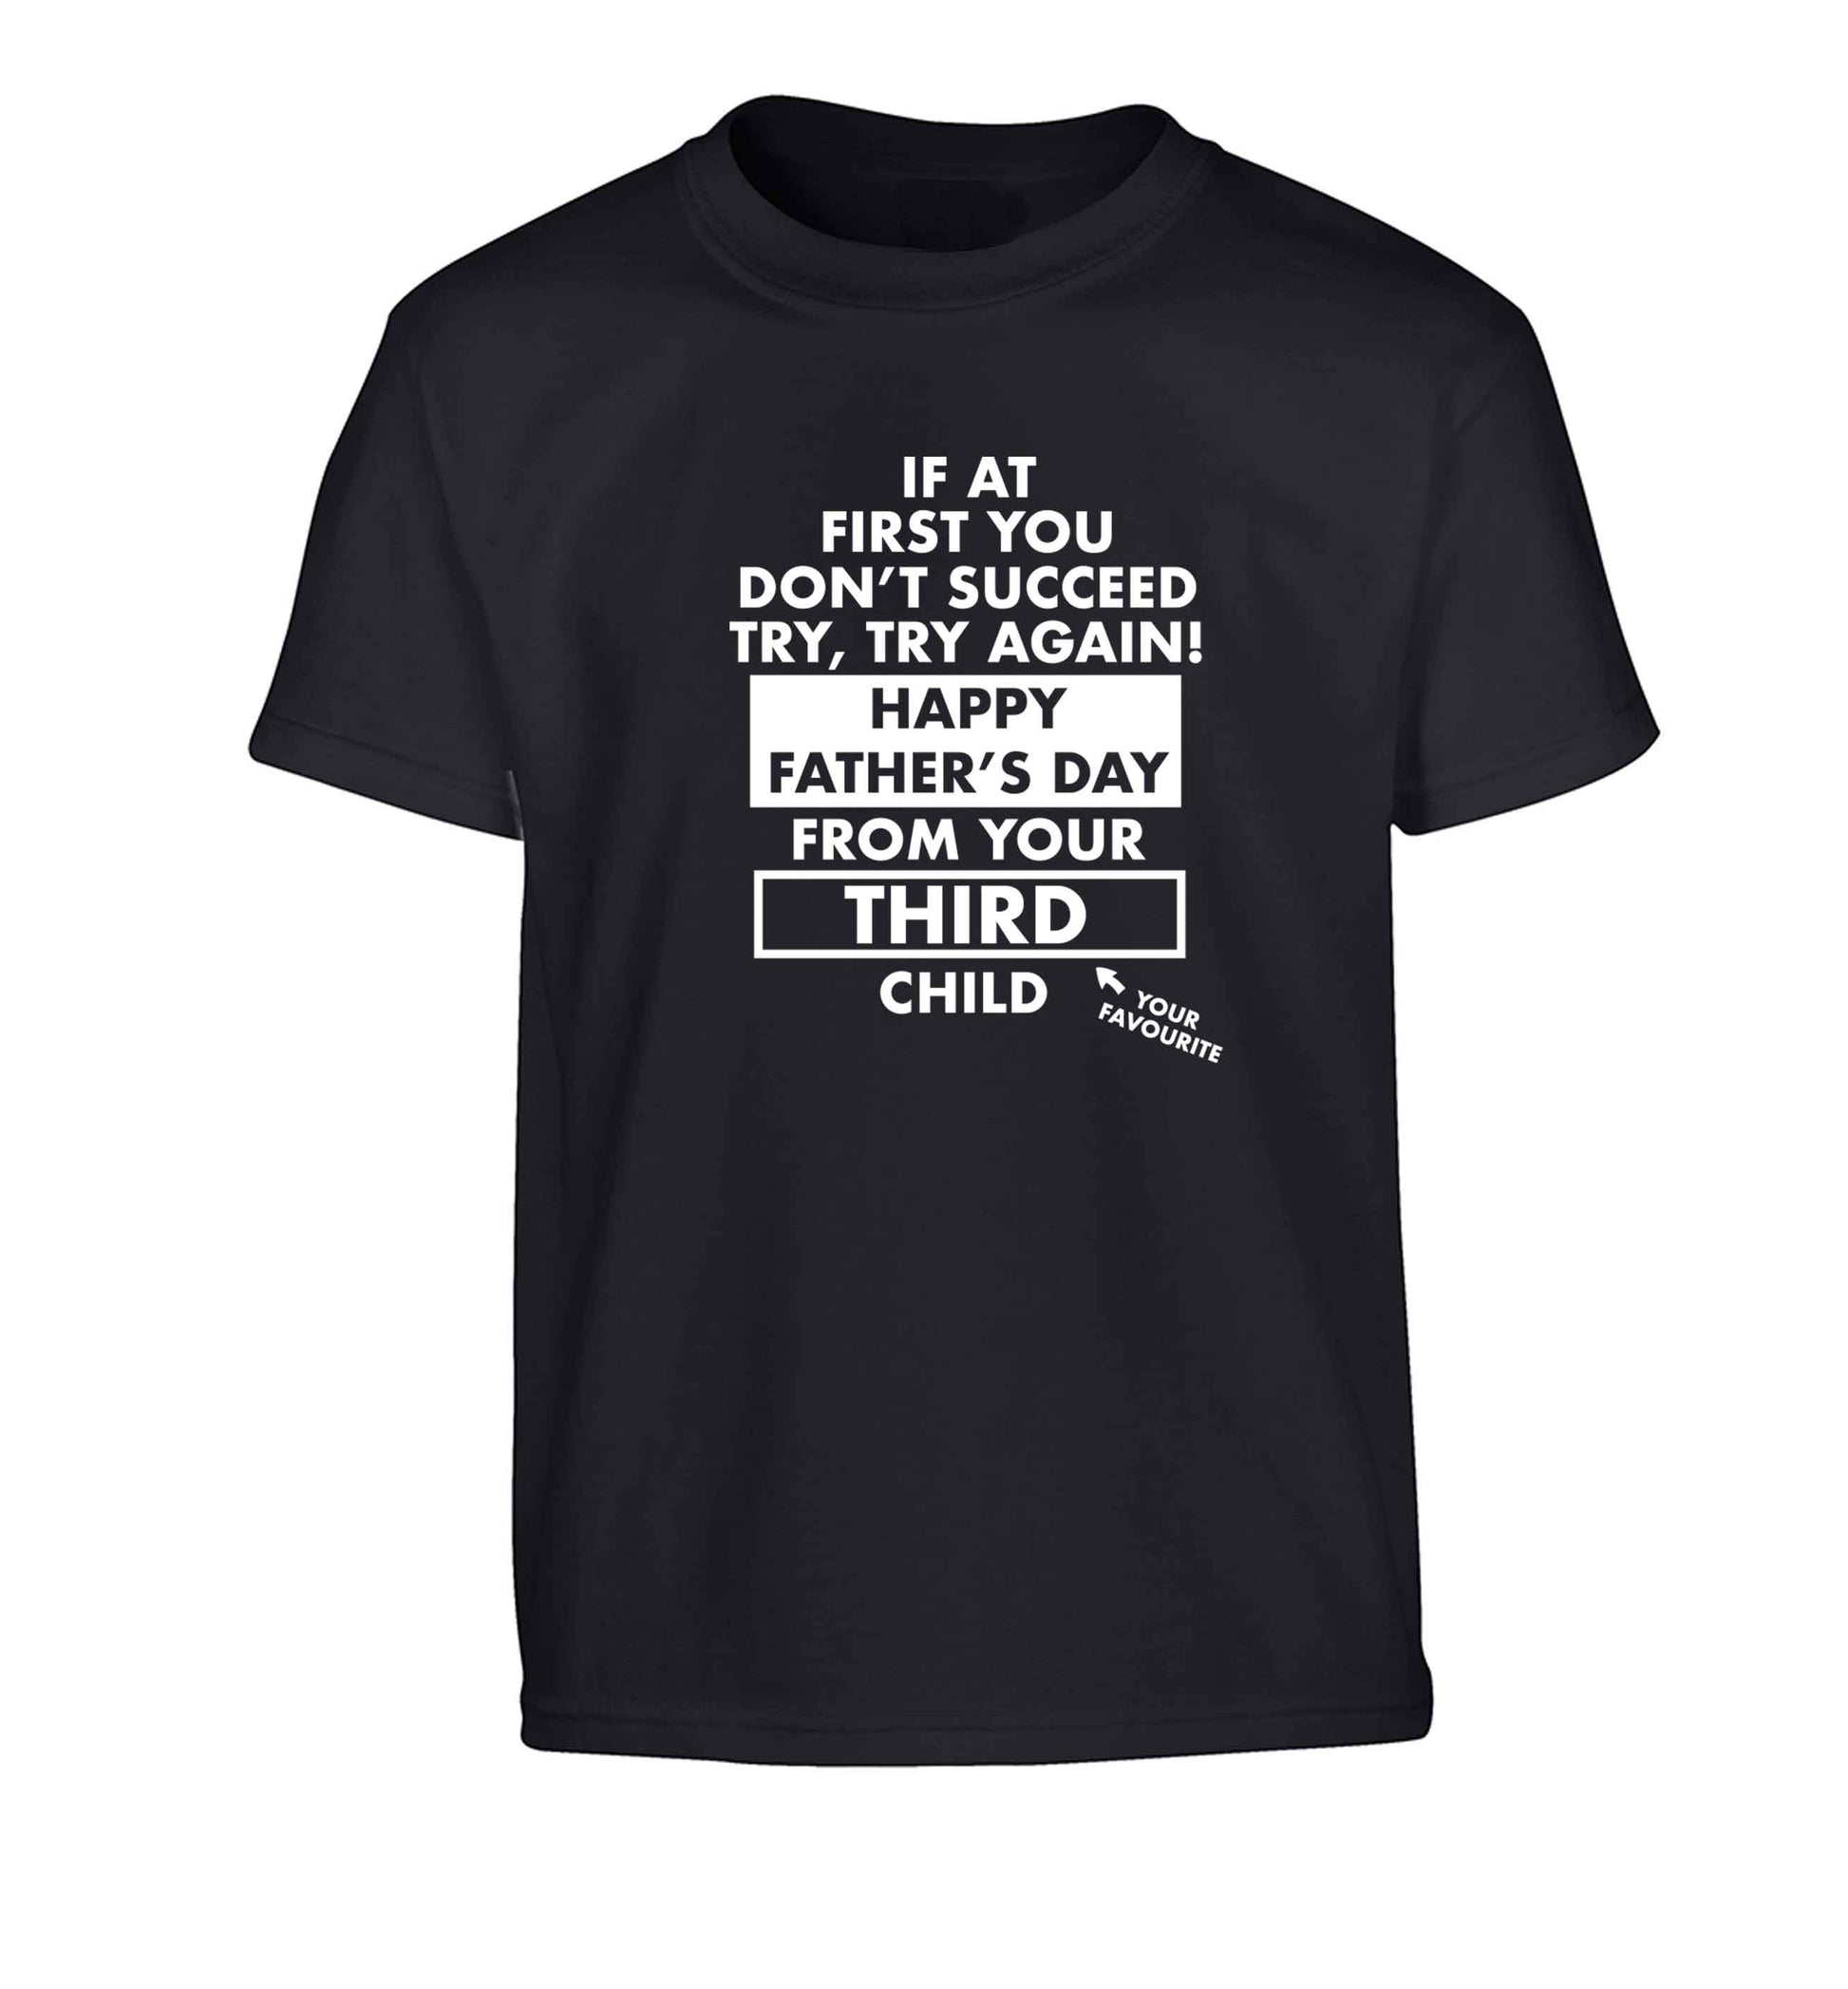 If at first you don't succeed try, try again Happy Father's day from your third child! Children's black Tshirt 12-13 Years